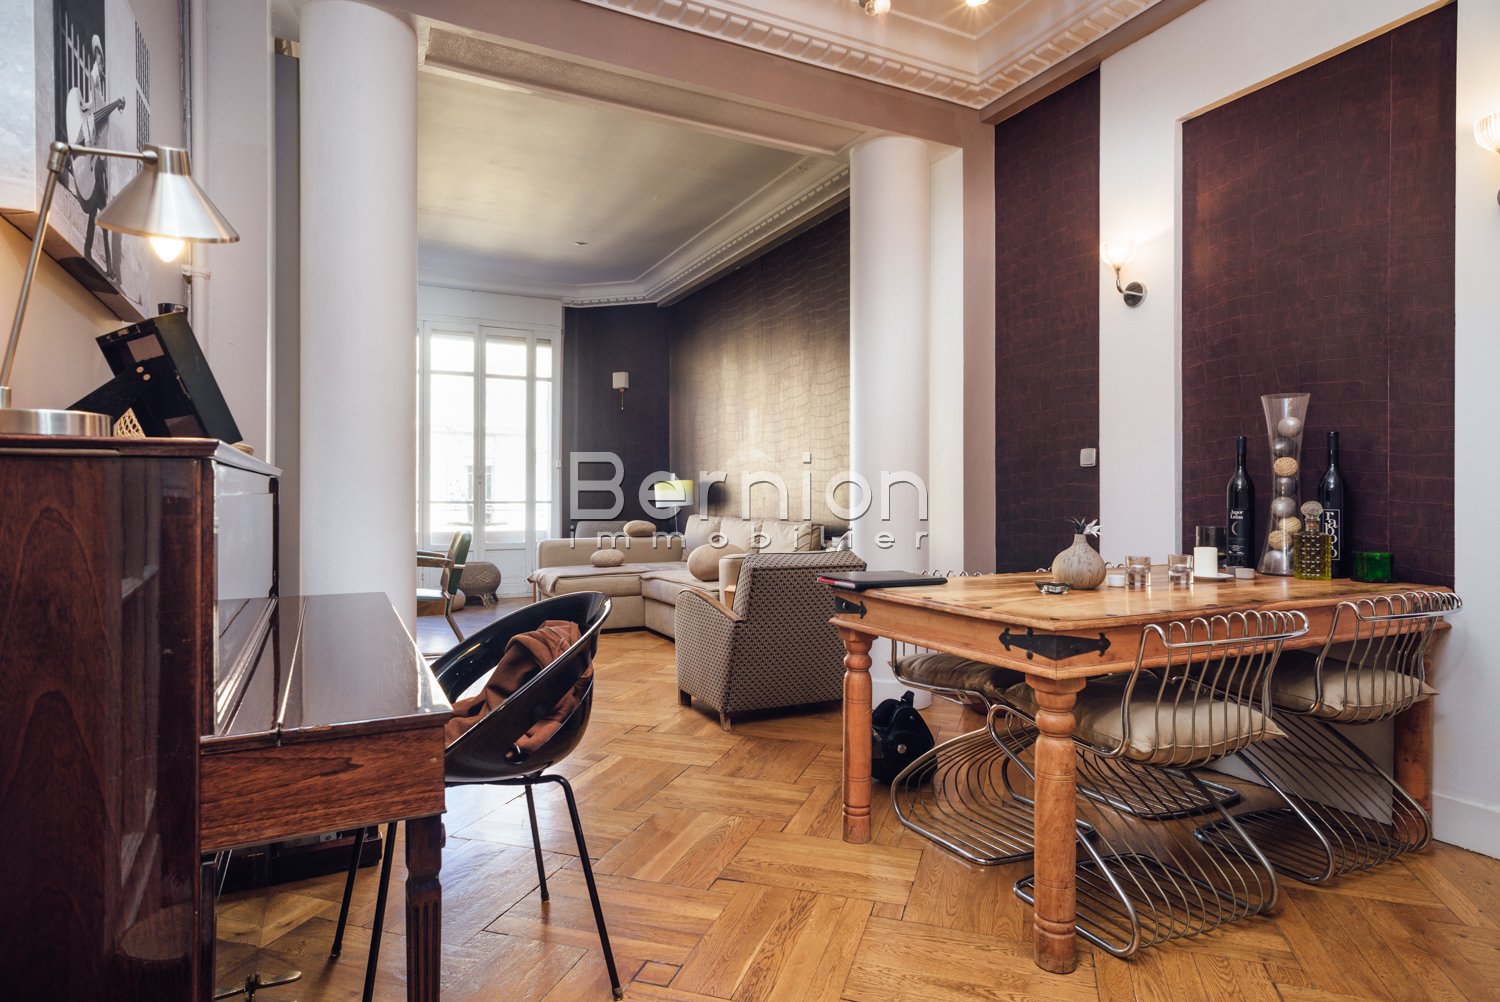 For Sale, Nice City Center Beautiful 72 sqm Apartment with terrace in Art Deco Building / photo 7